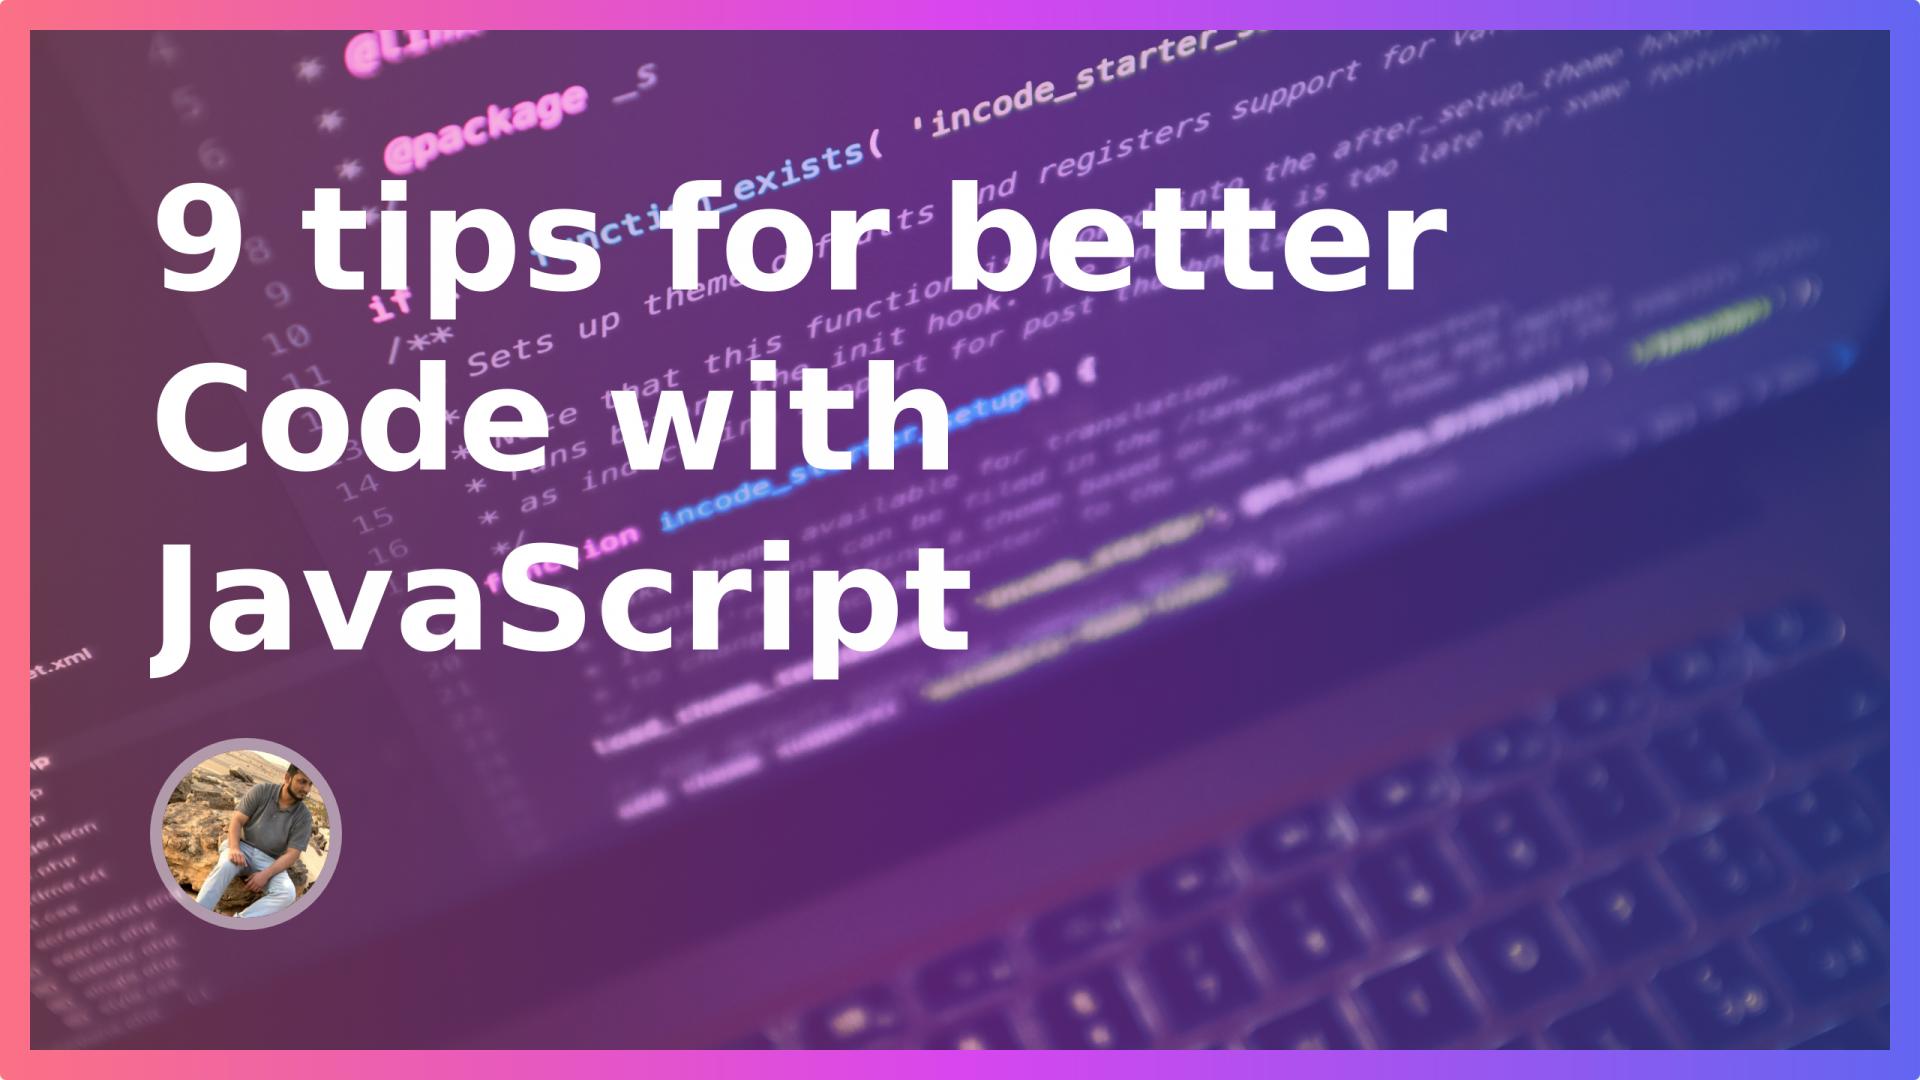 9 tips for better Code with JavaScript